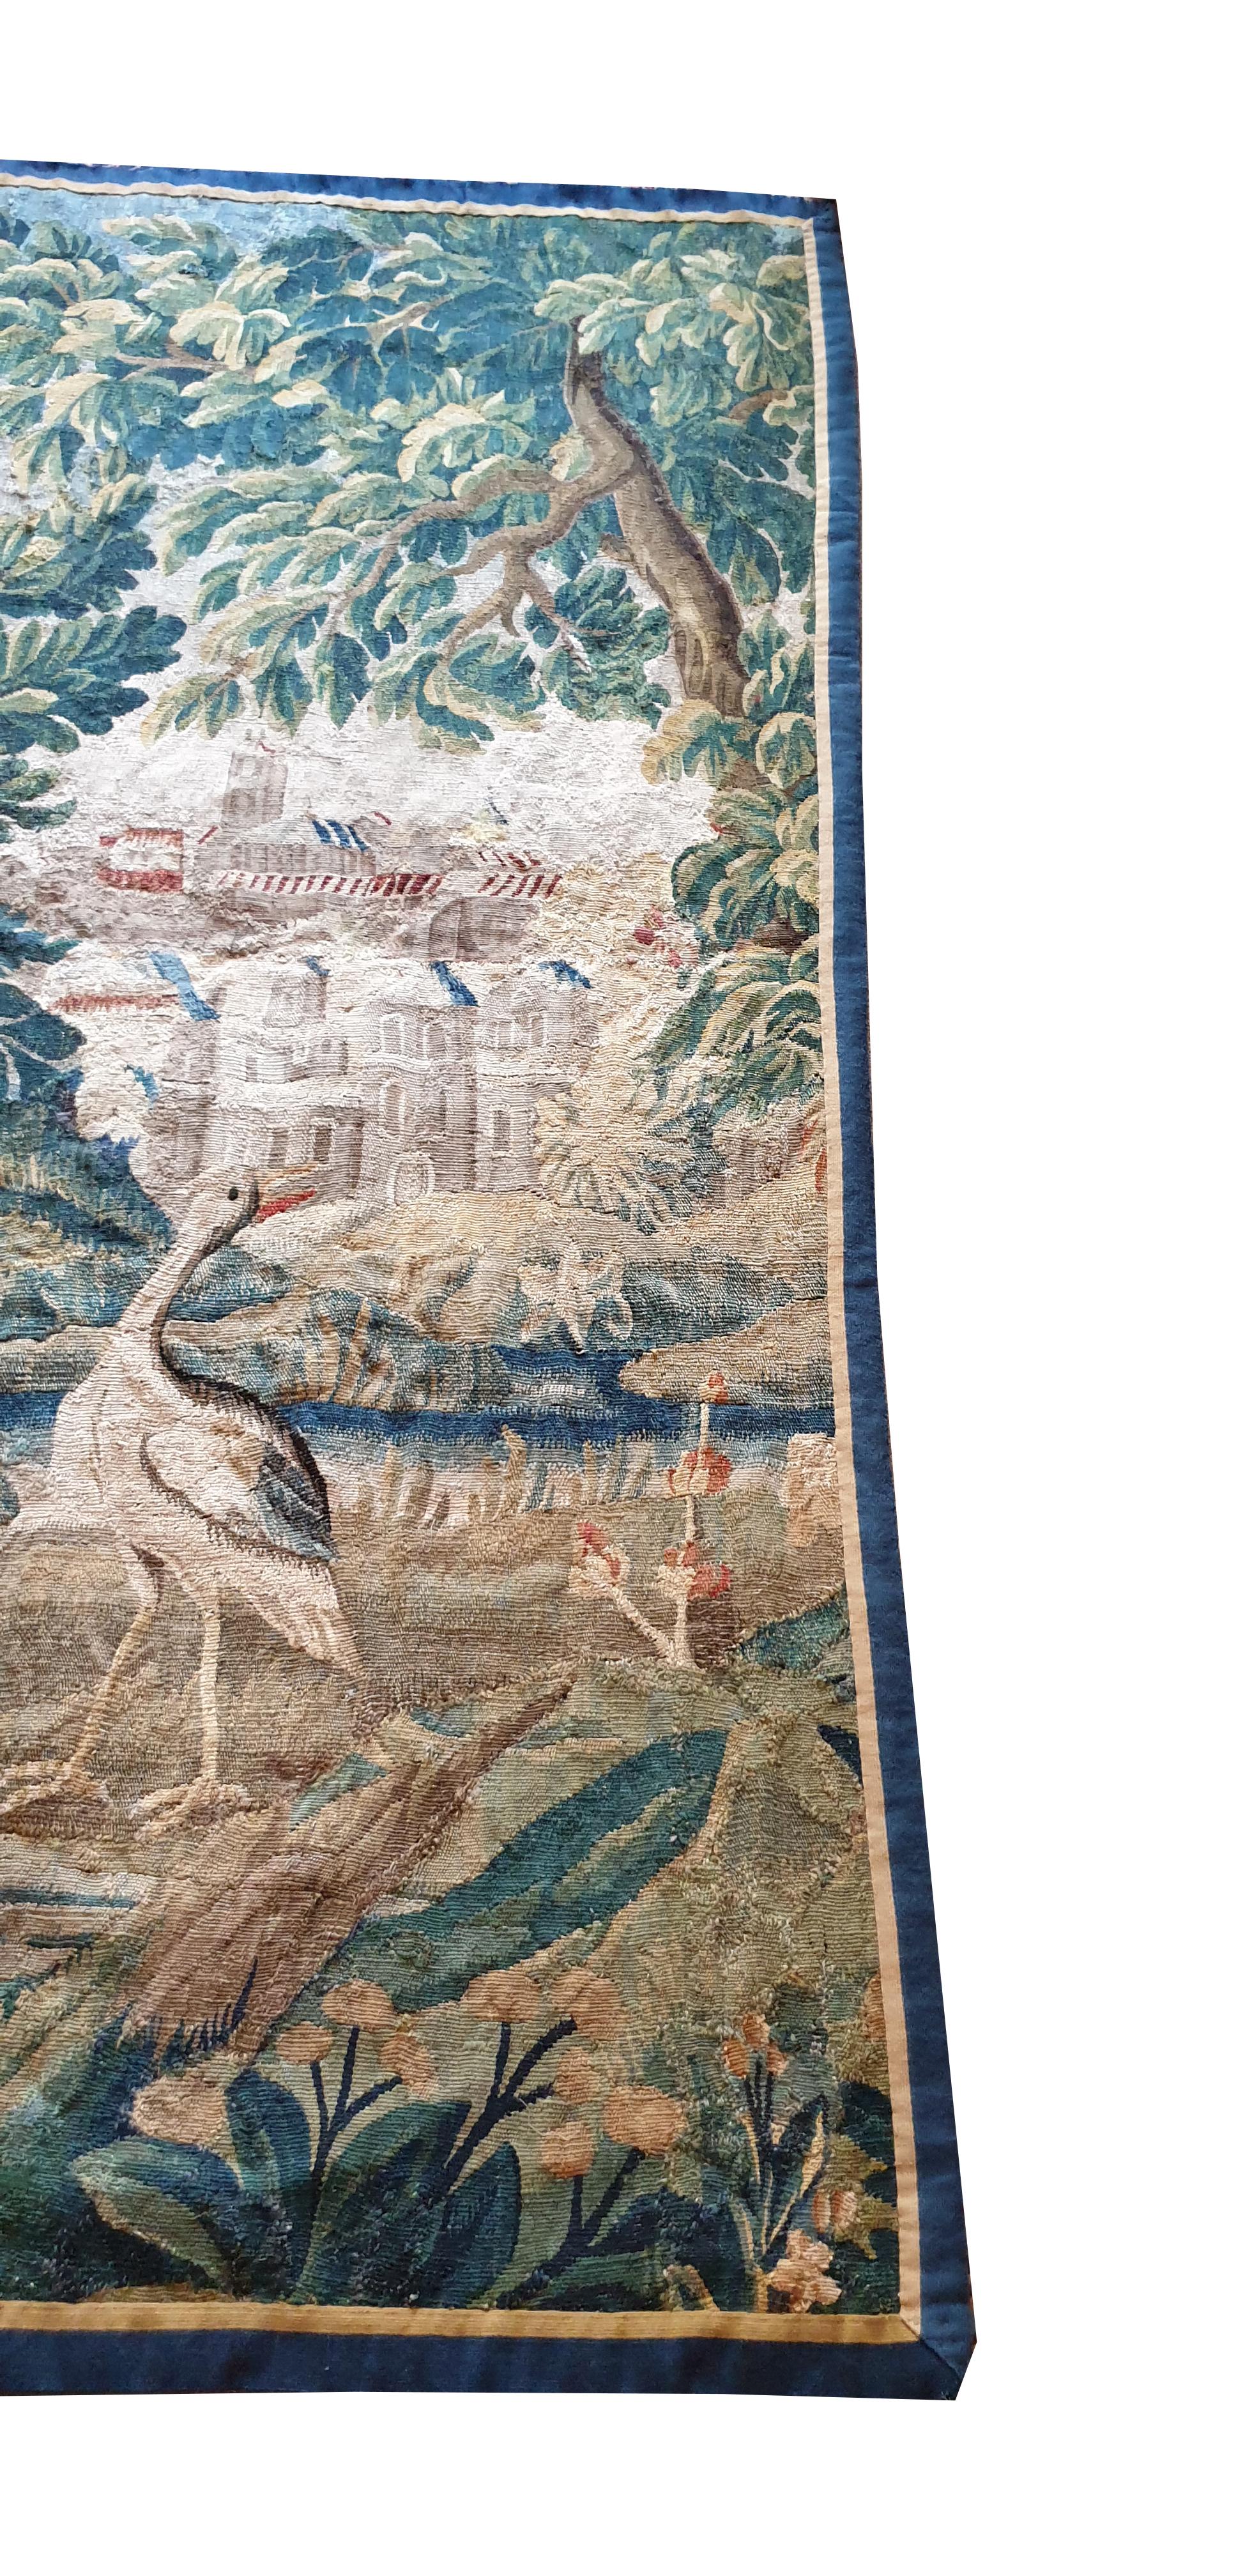 Hand-Woven 915 - 18th Century Aubusson Tapestry